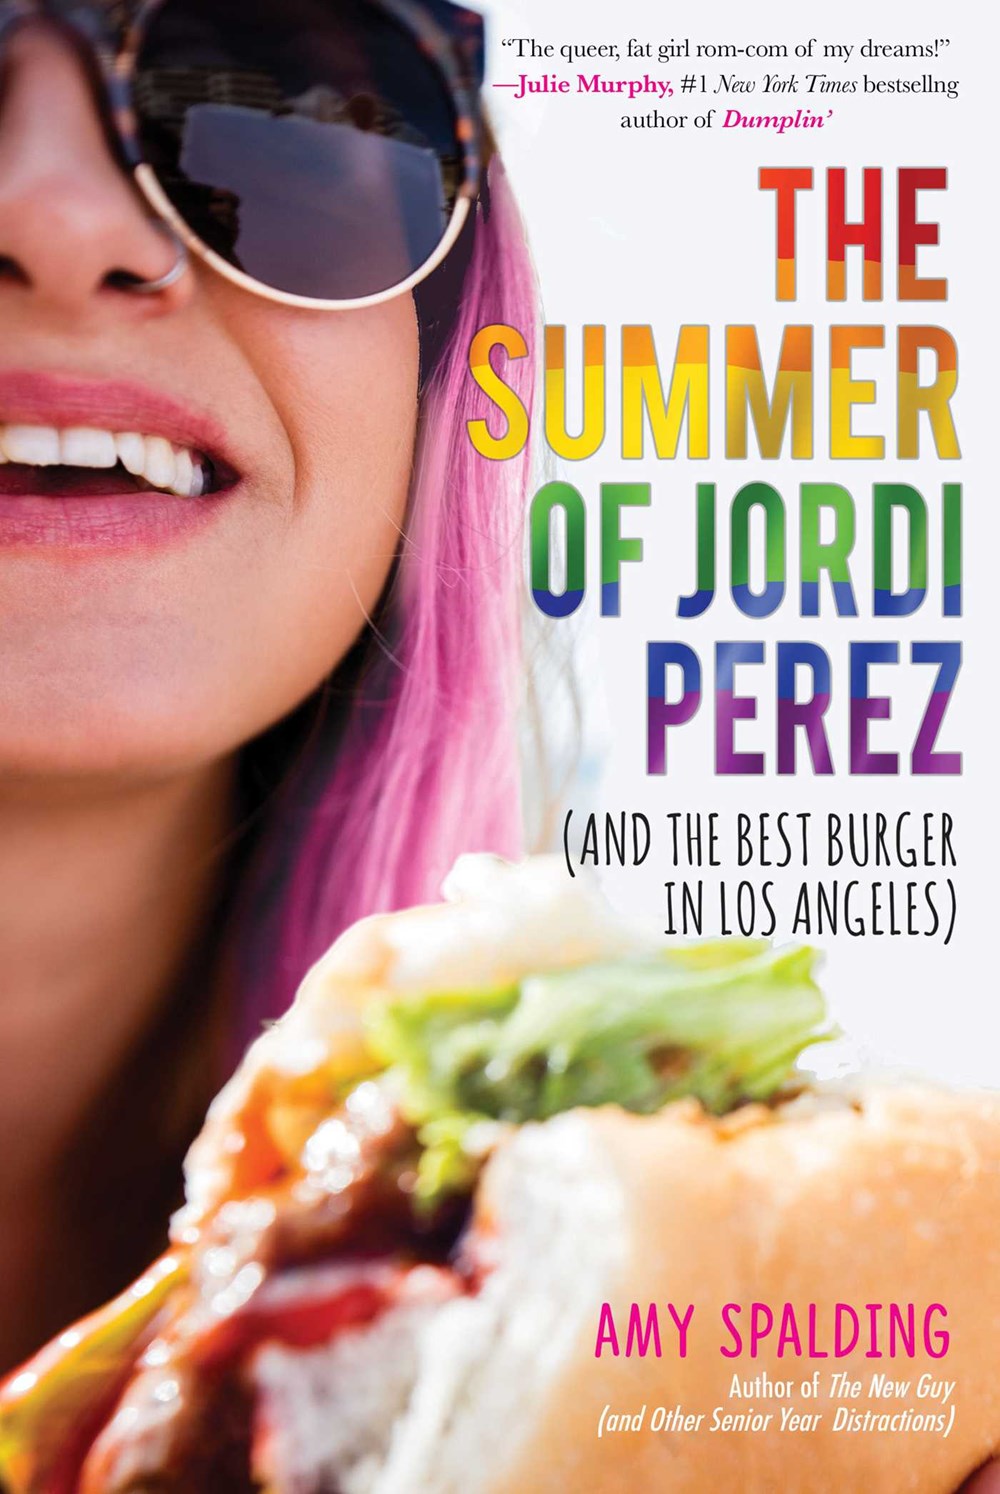 The Summer of Jordi Perez (And the Best Burger in Los Angelese) by Amy Spalding